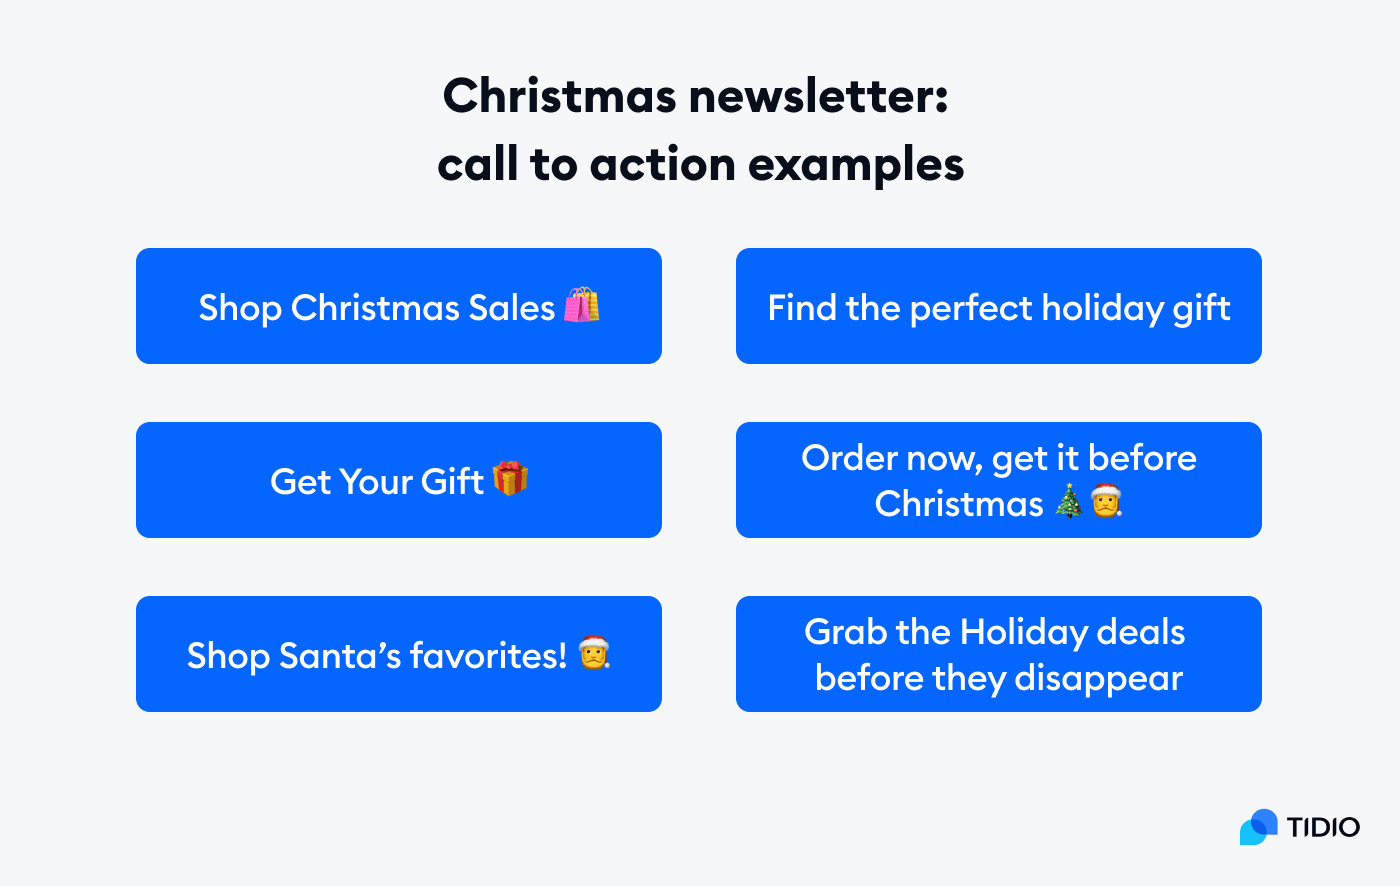 8 Creative Ideas That Can Spice Up Your Annual Christmas Newsletter – THE  FOURTH BUD